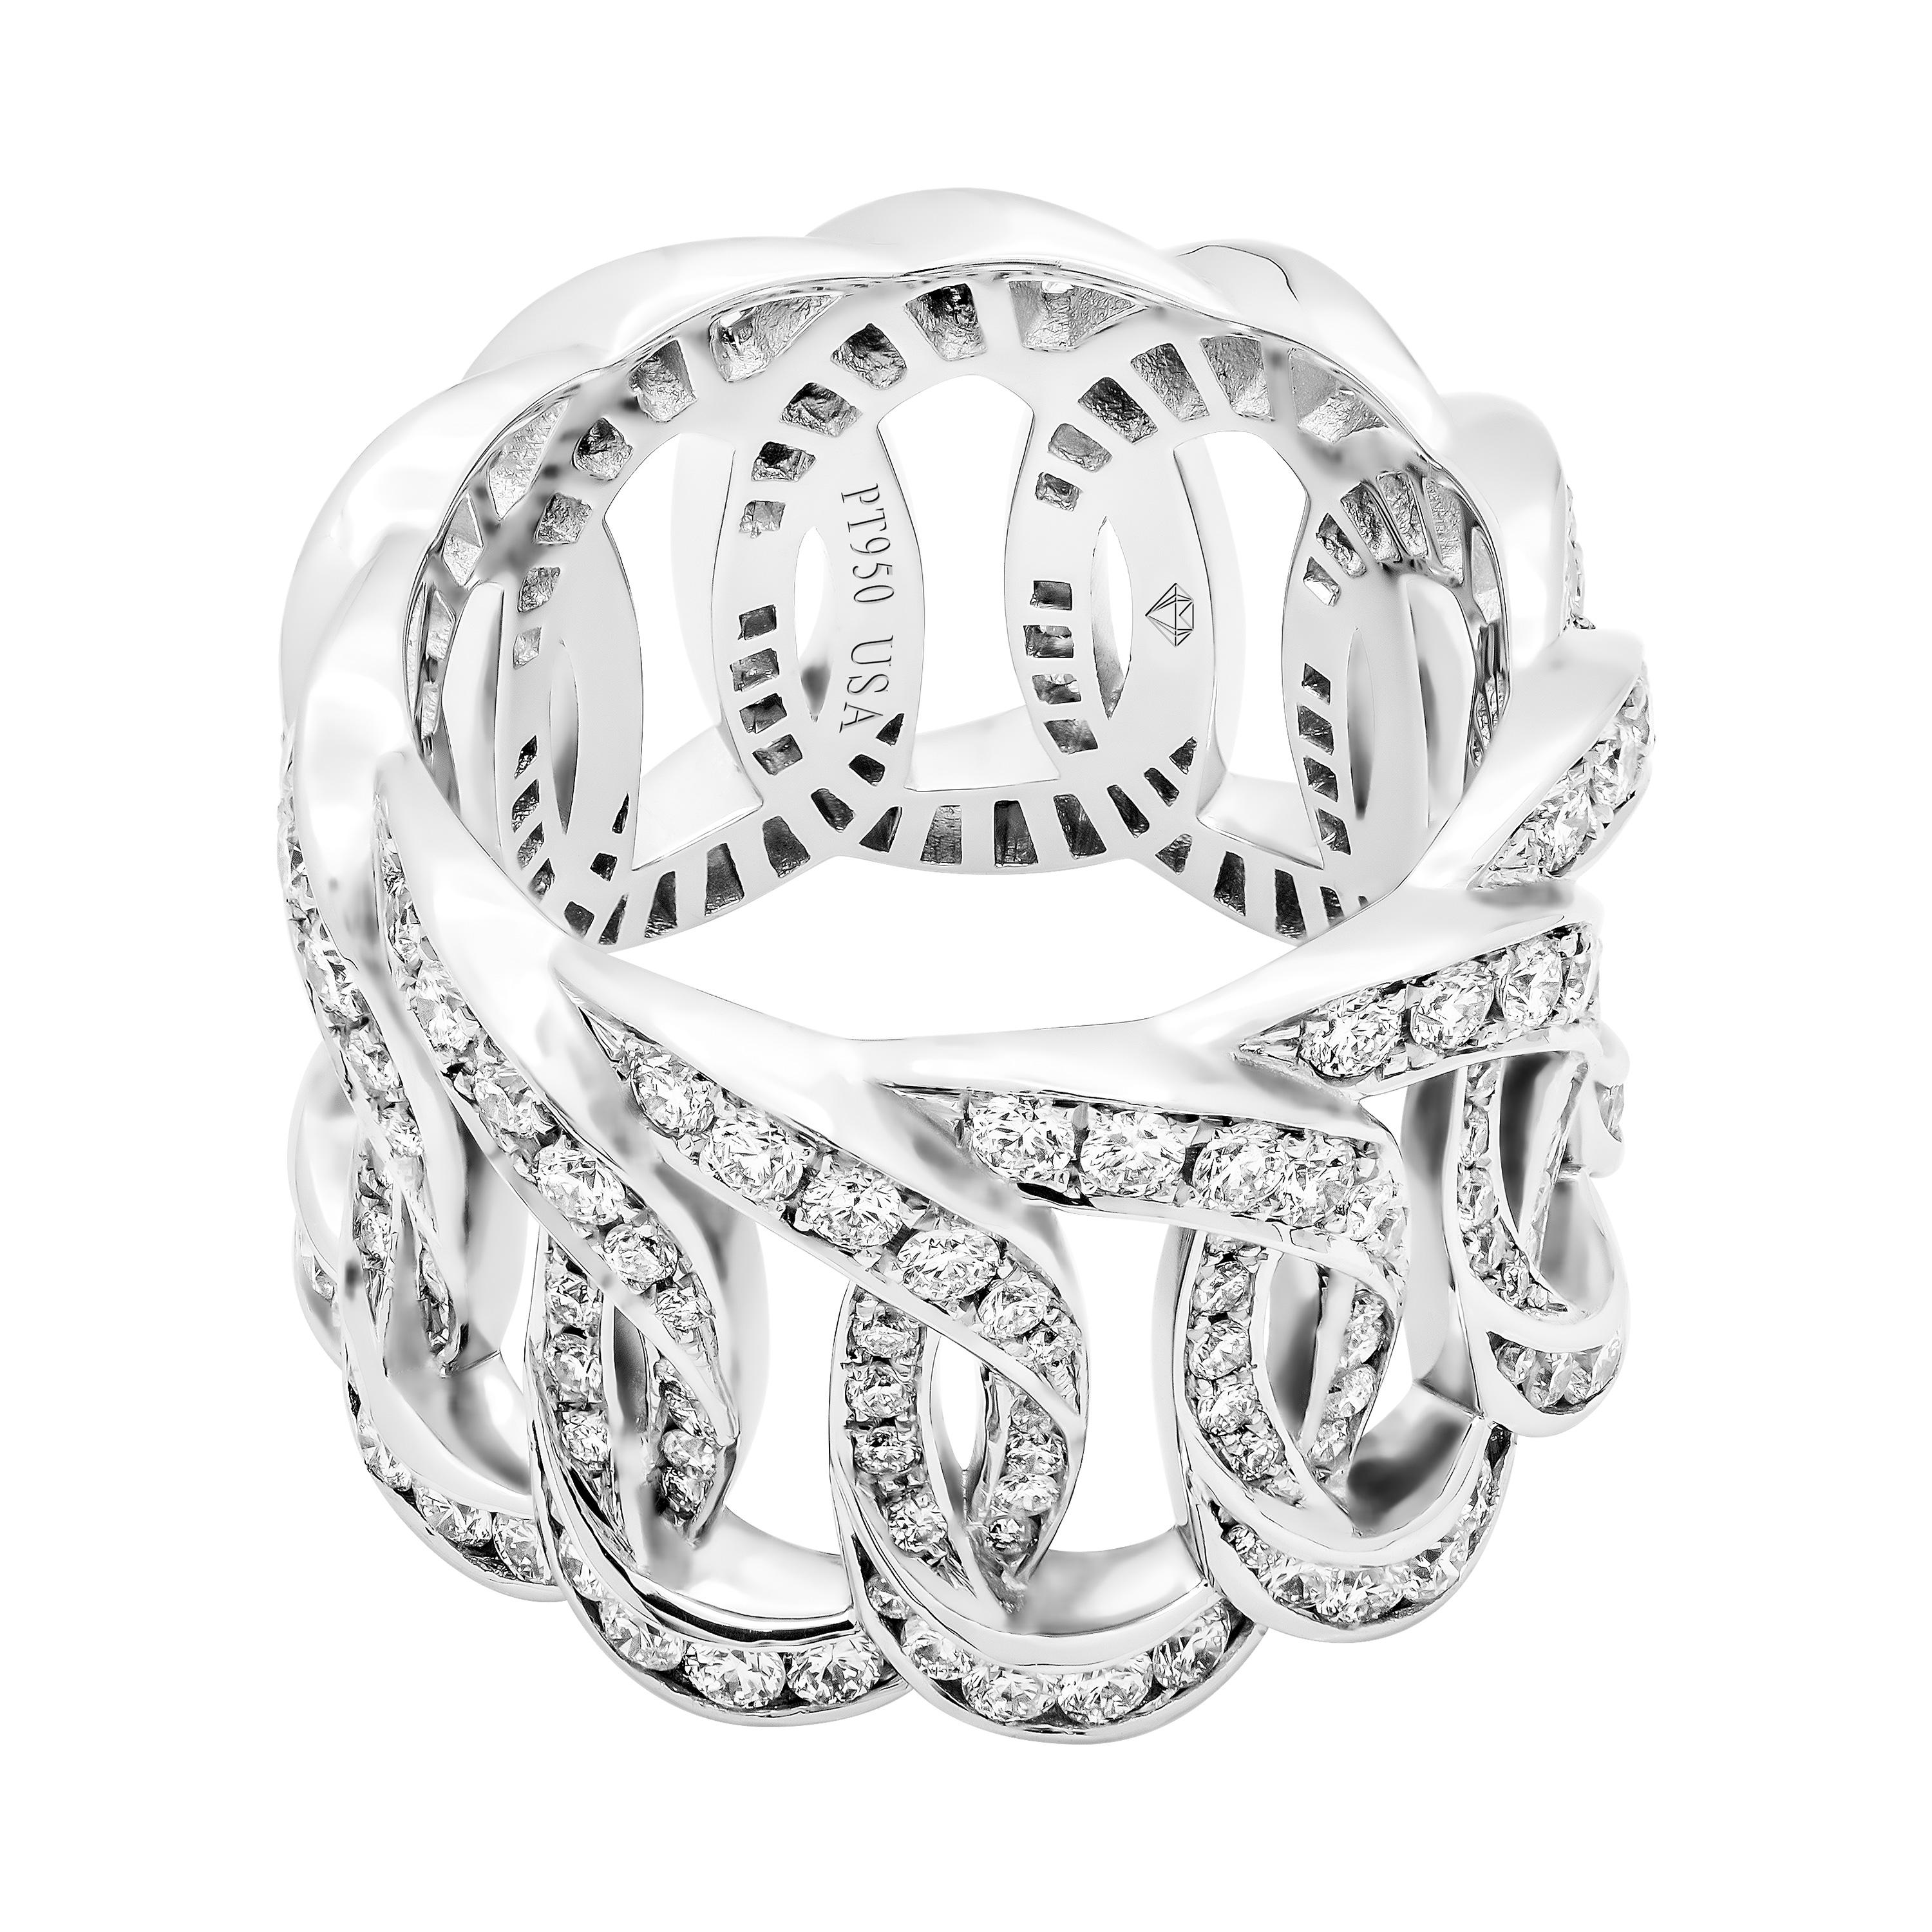 Infinity Link Diamond Band In Platinum 950
Beautiful and Timeless piece of Jewelry! Trend of this season,
Mounted in Platinum with almost 300 full cut pave diamonds F-G color, VVS, totaling 2.05ct 
Ring Details: 
Size: 6.25 (because this band is